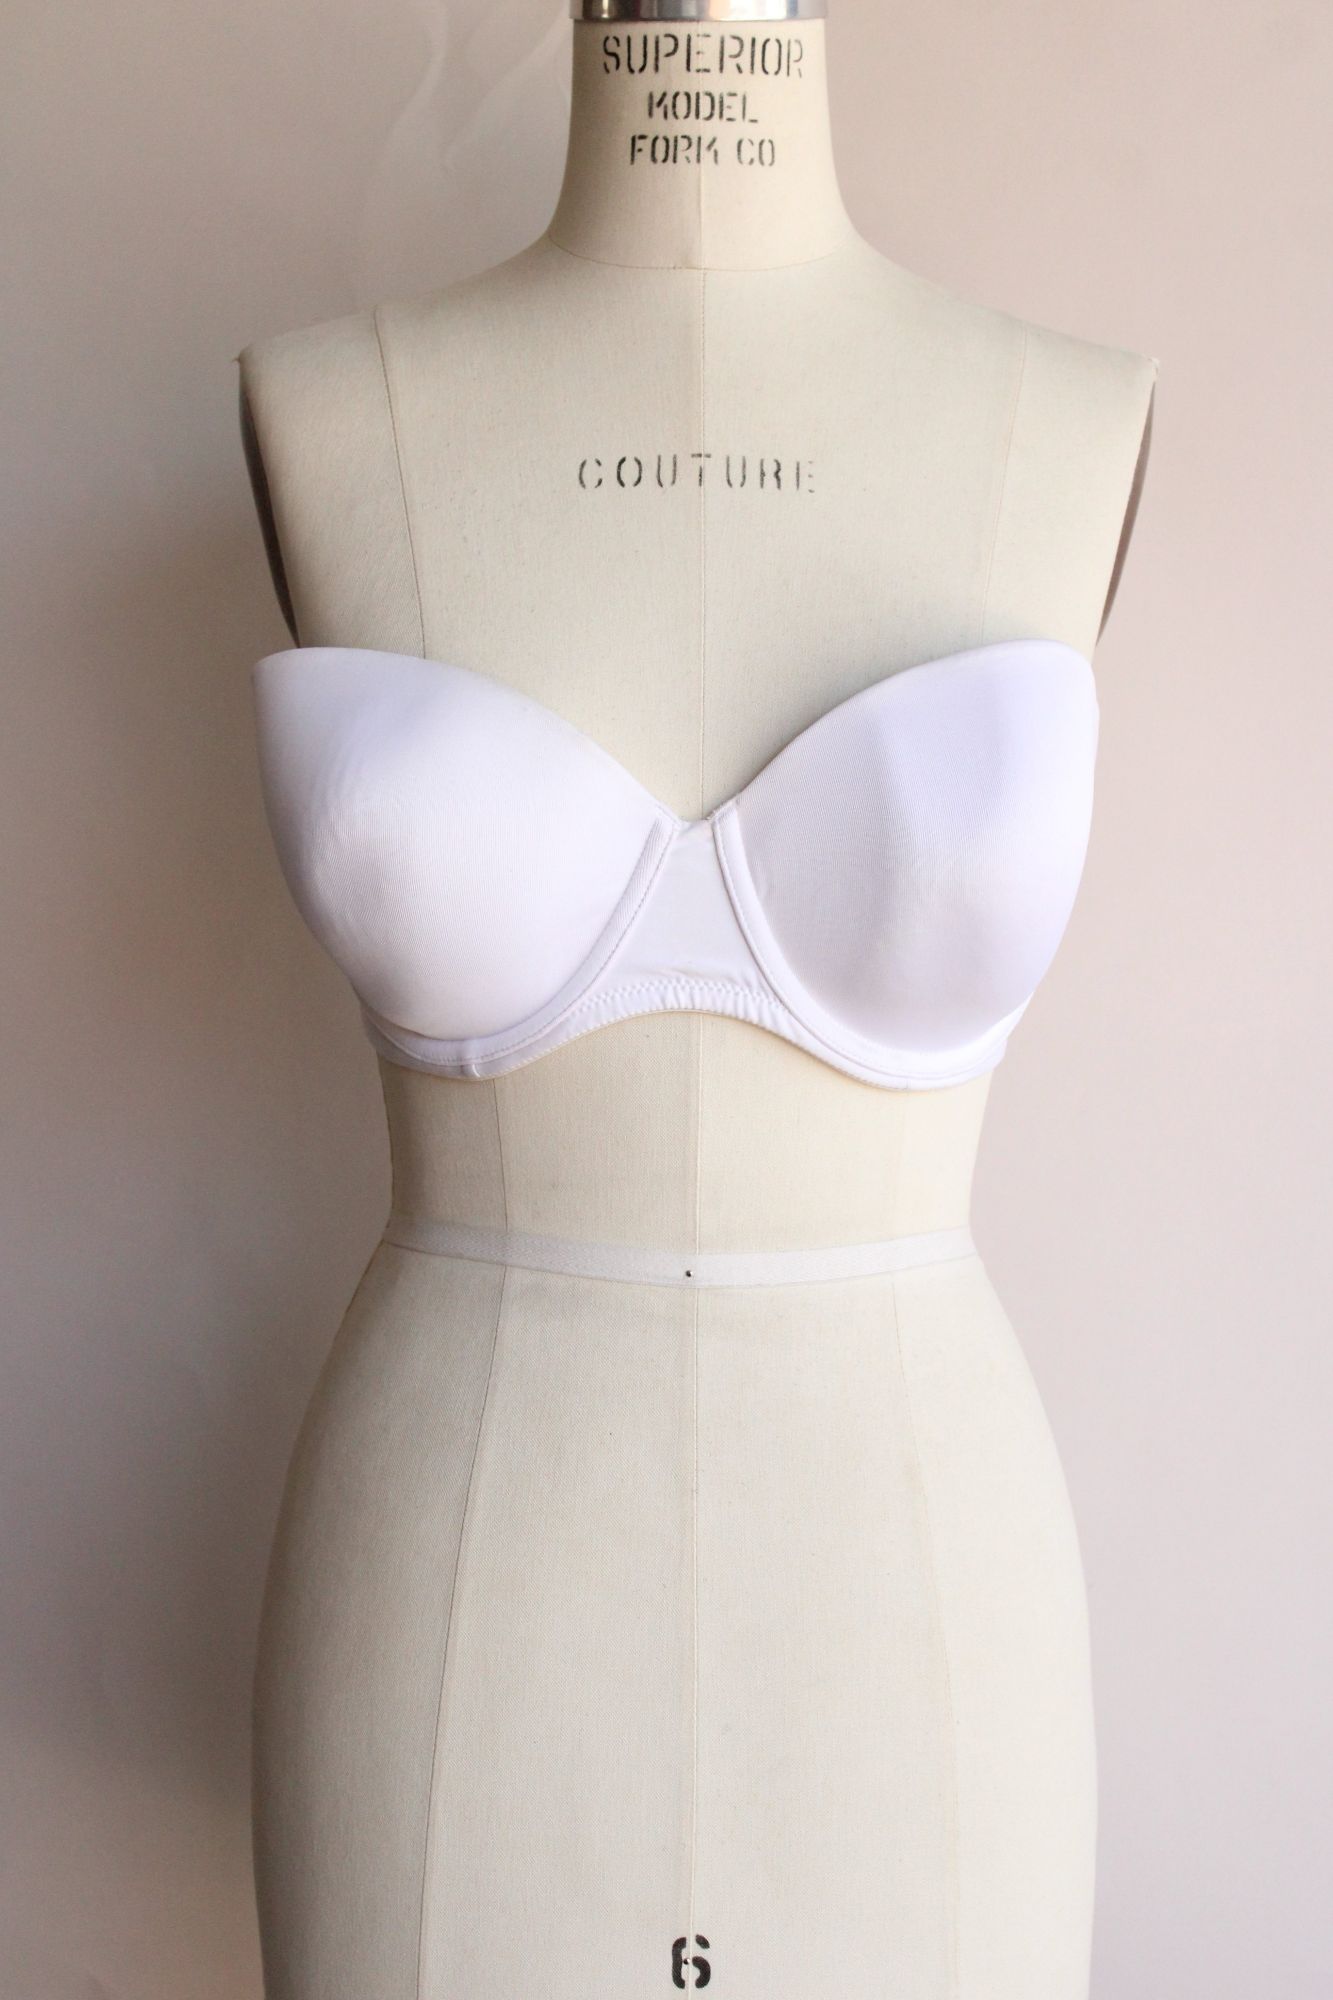 Maiden Form Strap/Strapless Bra - clothing & accessories - by